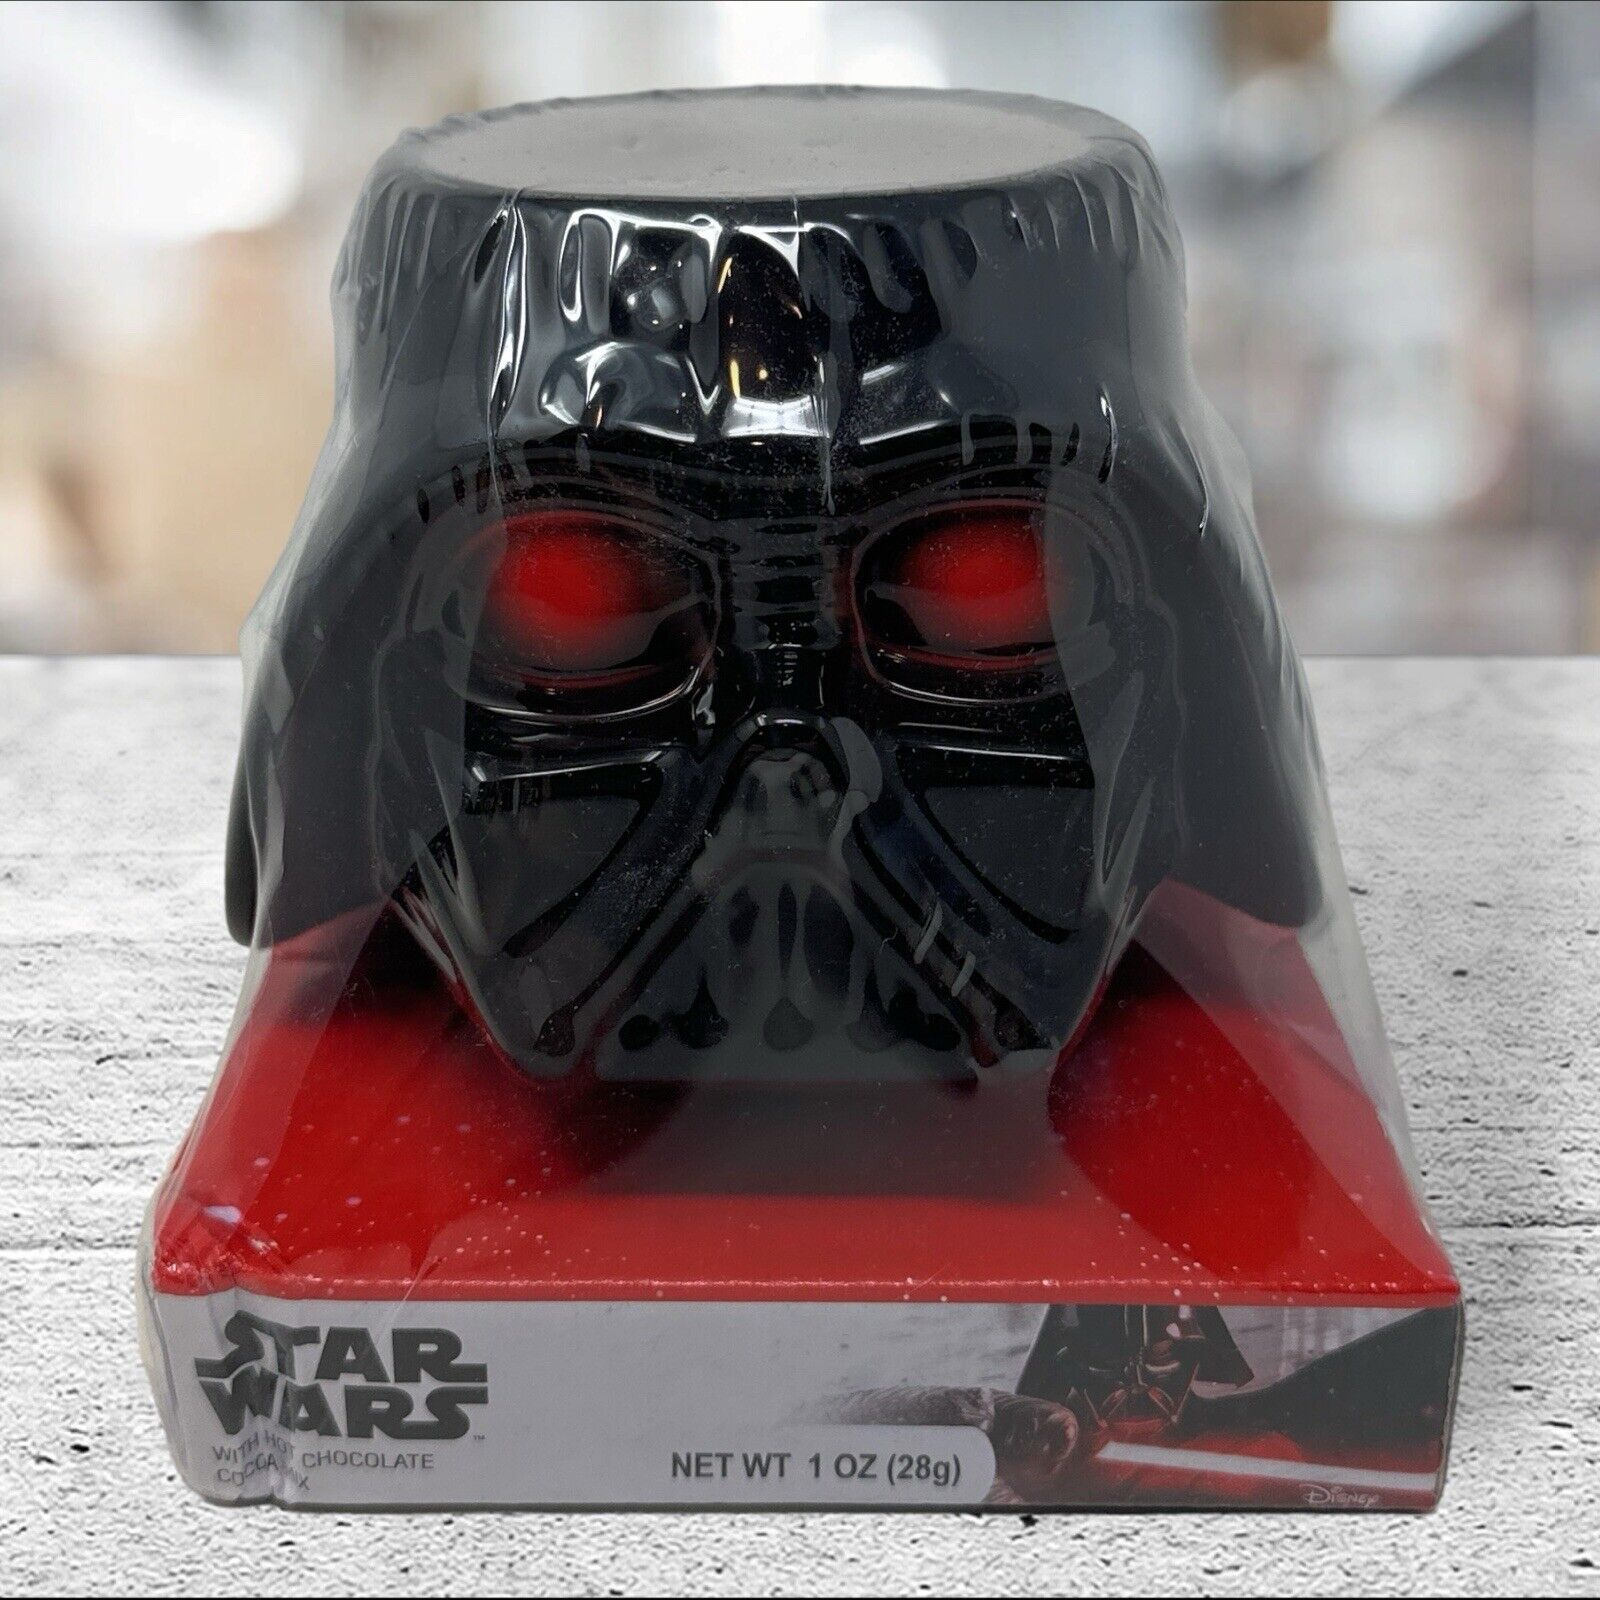 Star Wars Mug Darth Vader Galerie with Hot Chocolate Packet New Sealed Package